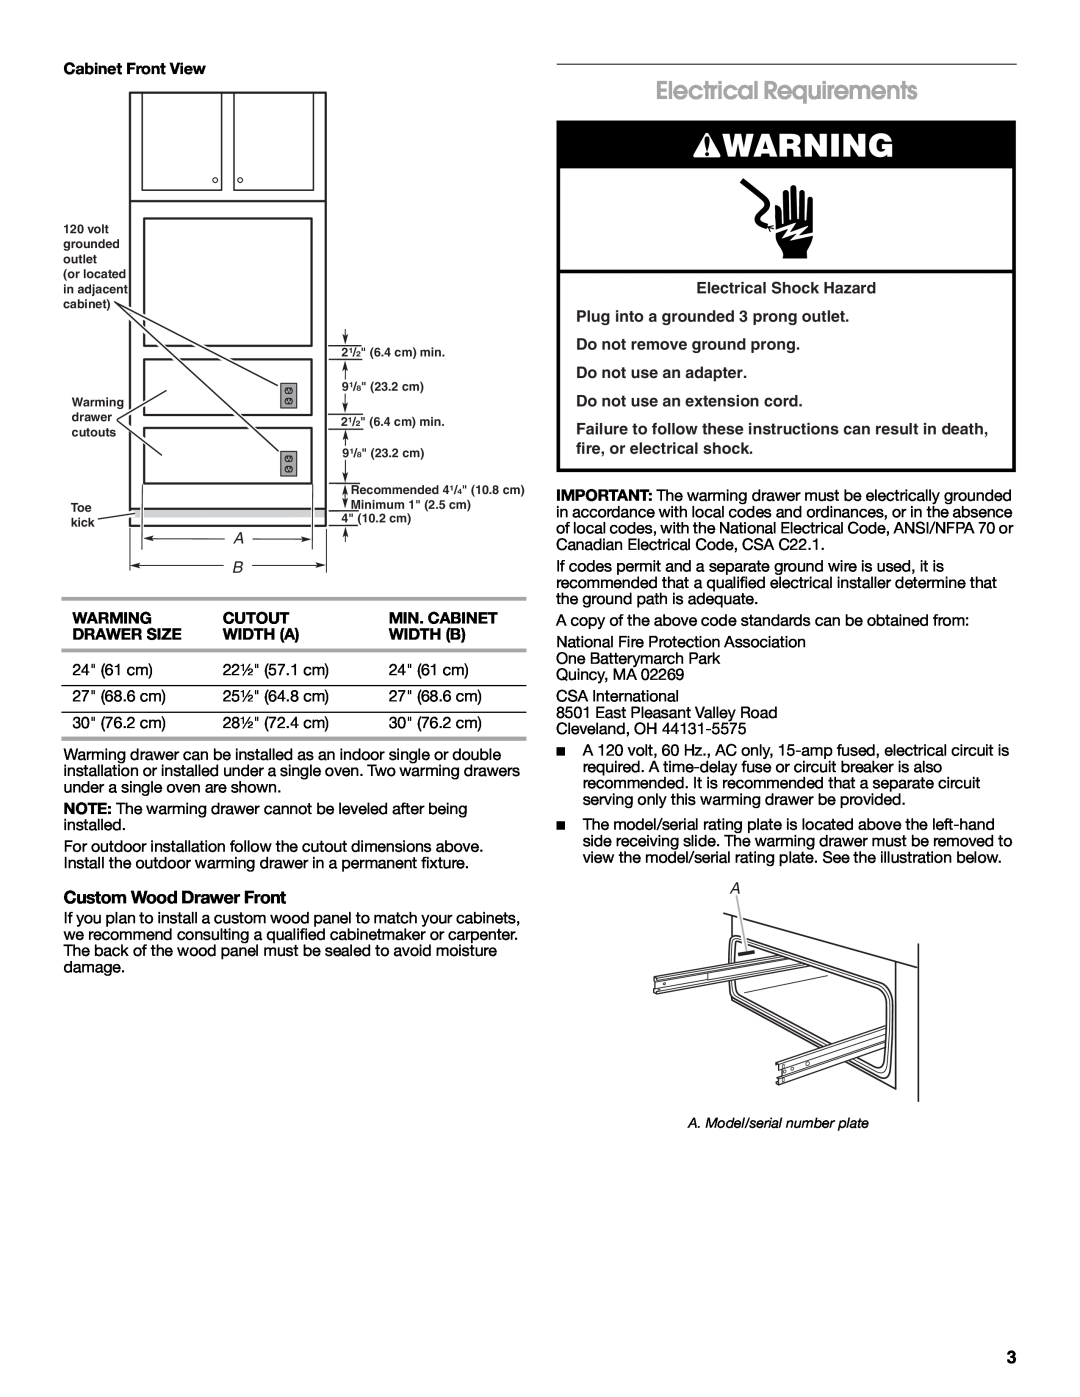 Whirlpool 9763140B installation instructions Electrical Requirements, Custom Wood Drawer Front 